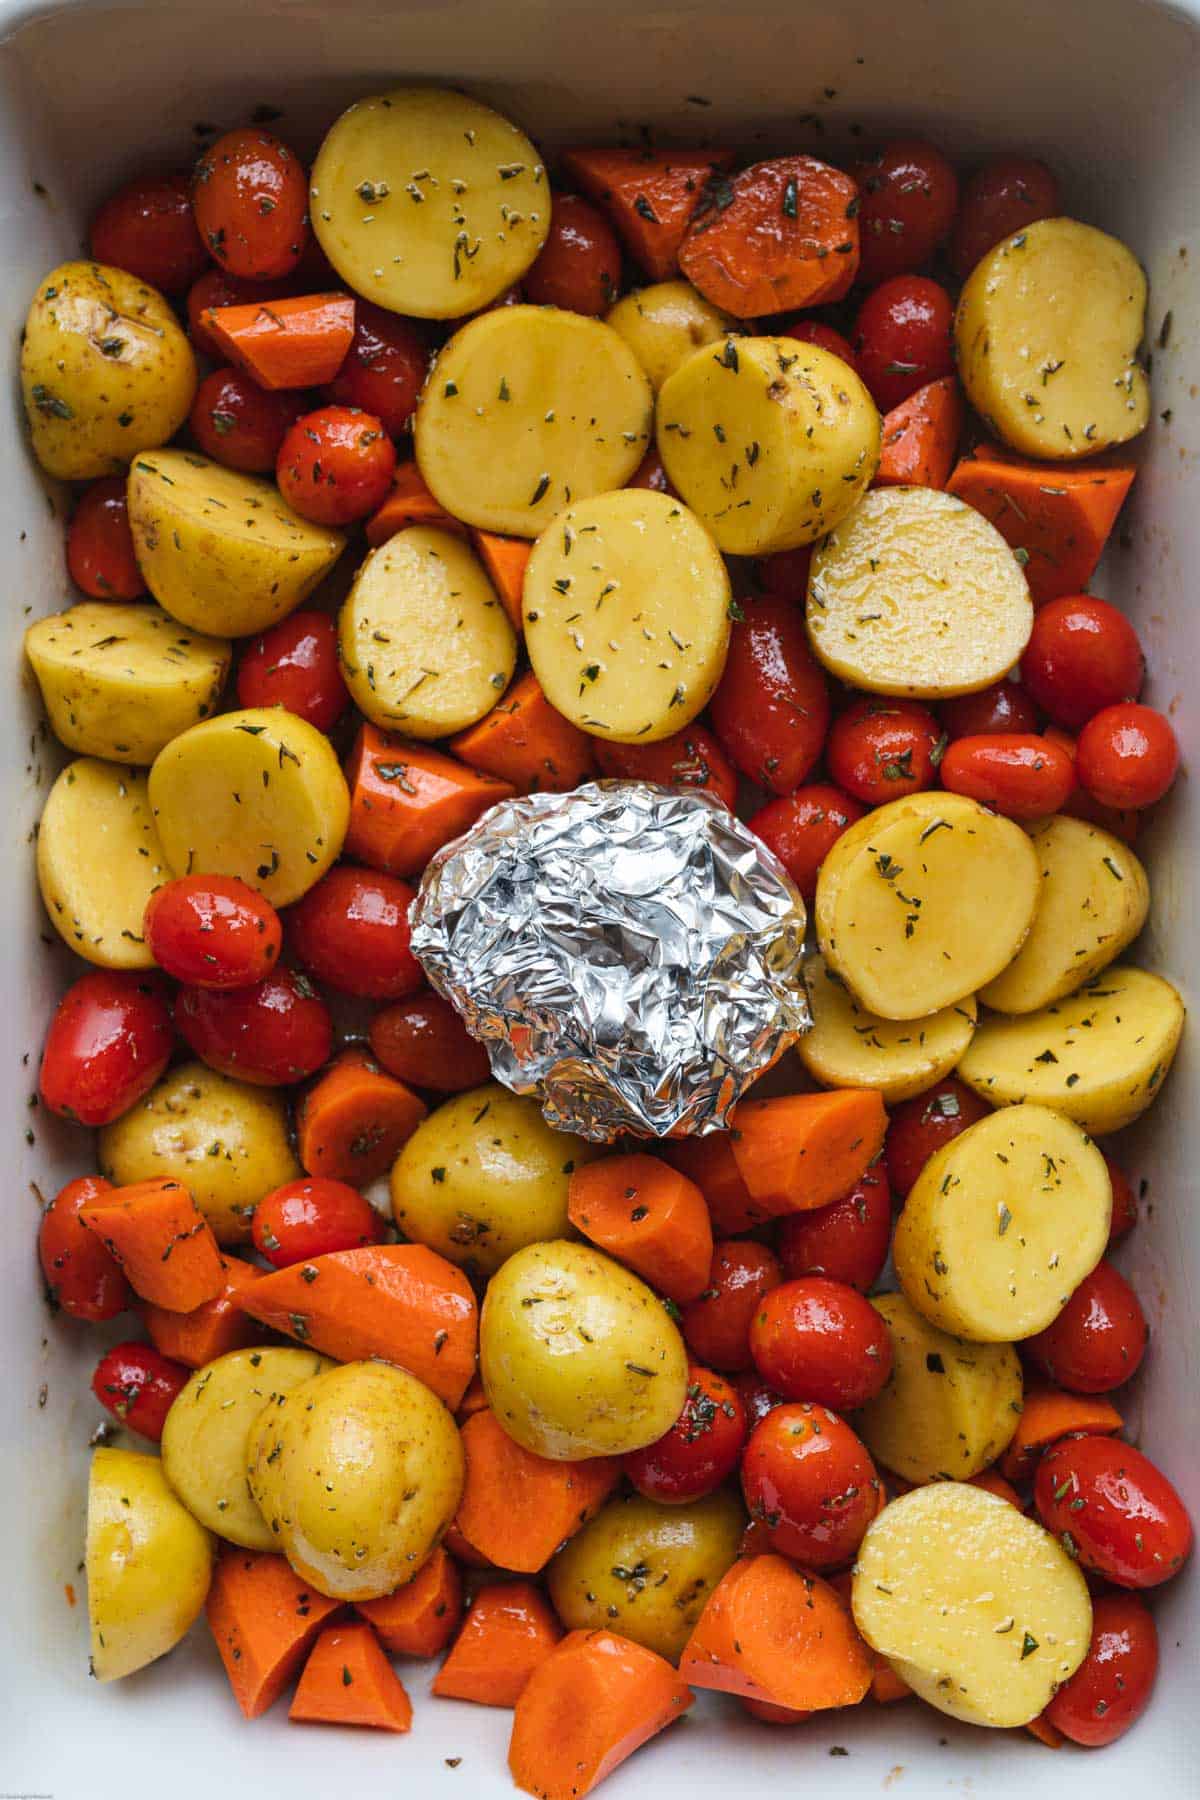 Baby potatoes, grape tomatoes, chopped carrots, and a head of garlic wrapped in aluminum foil in a large casserole dish. Tossed with herbs and olive oil.